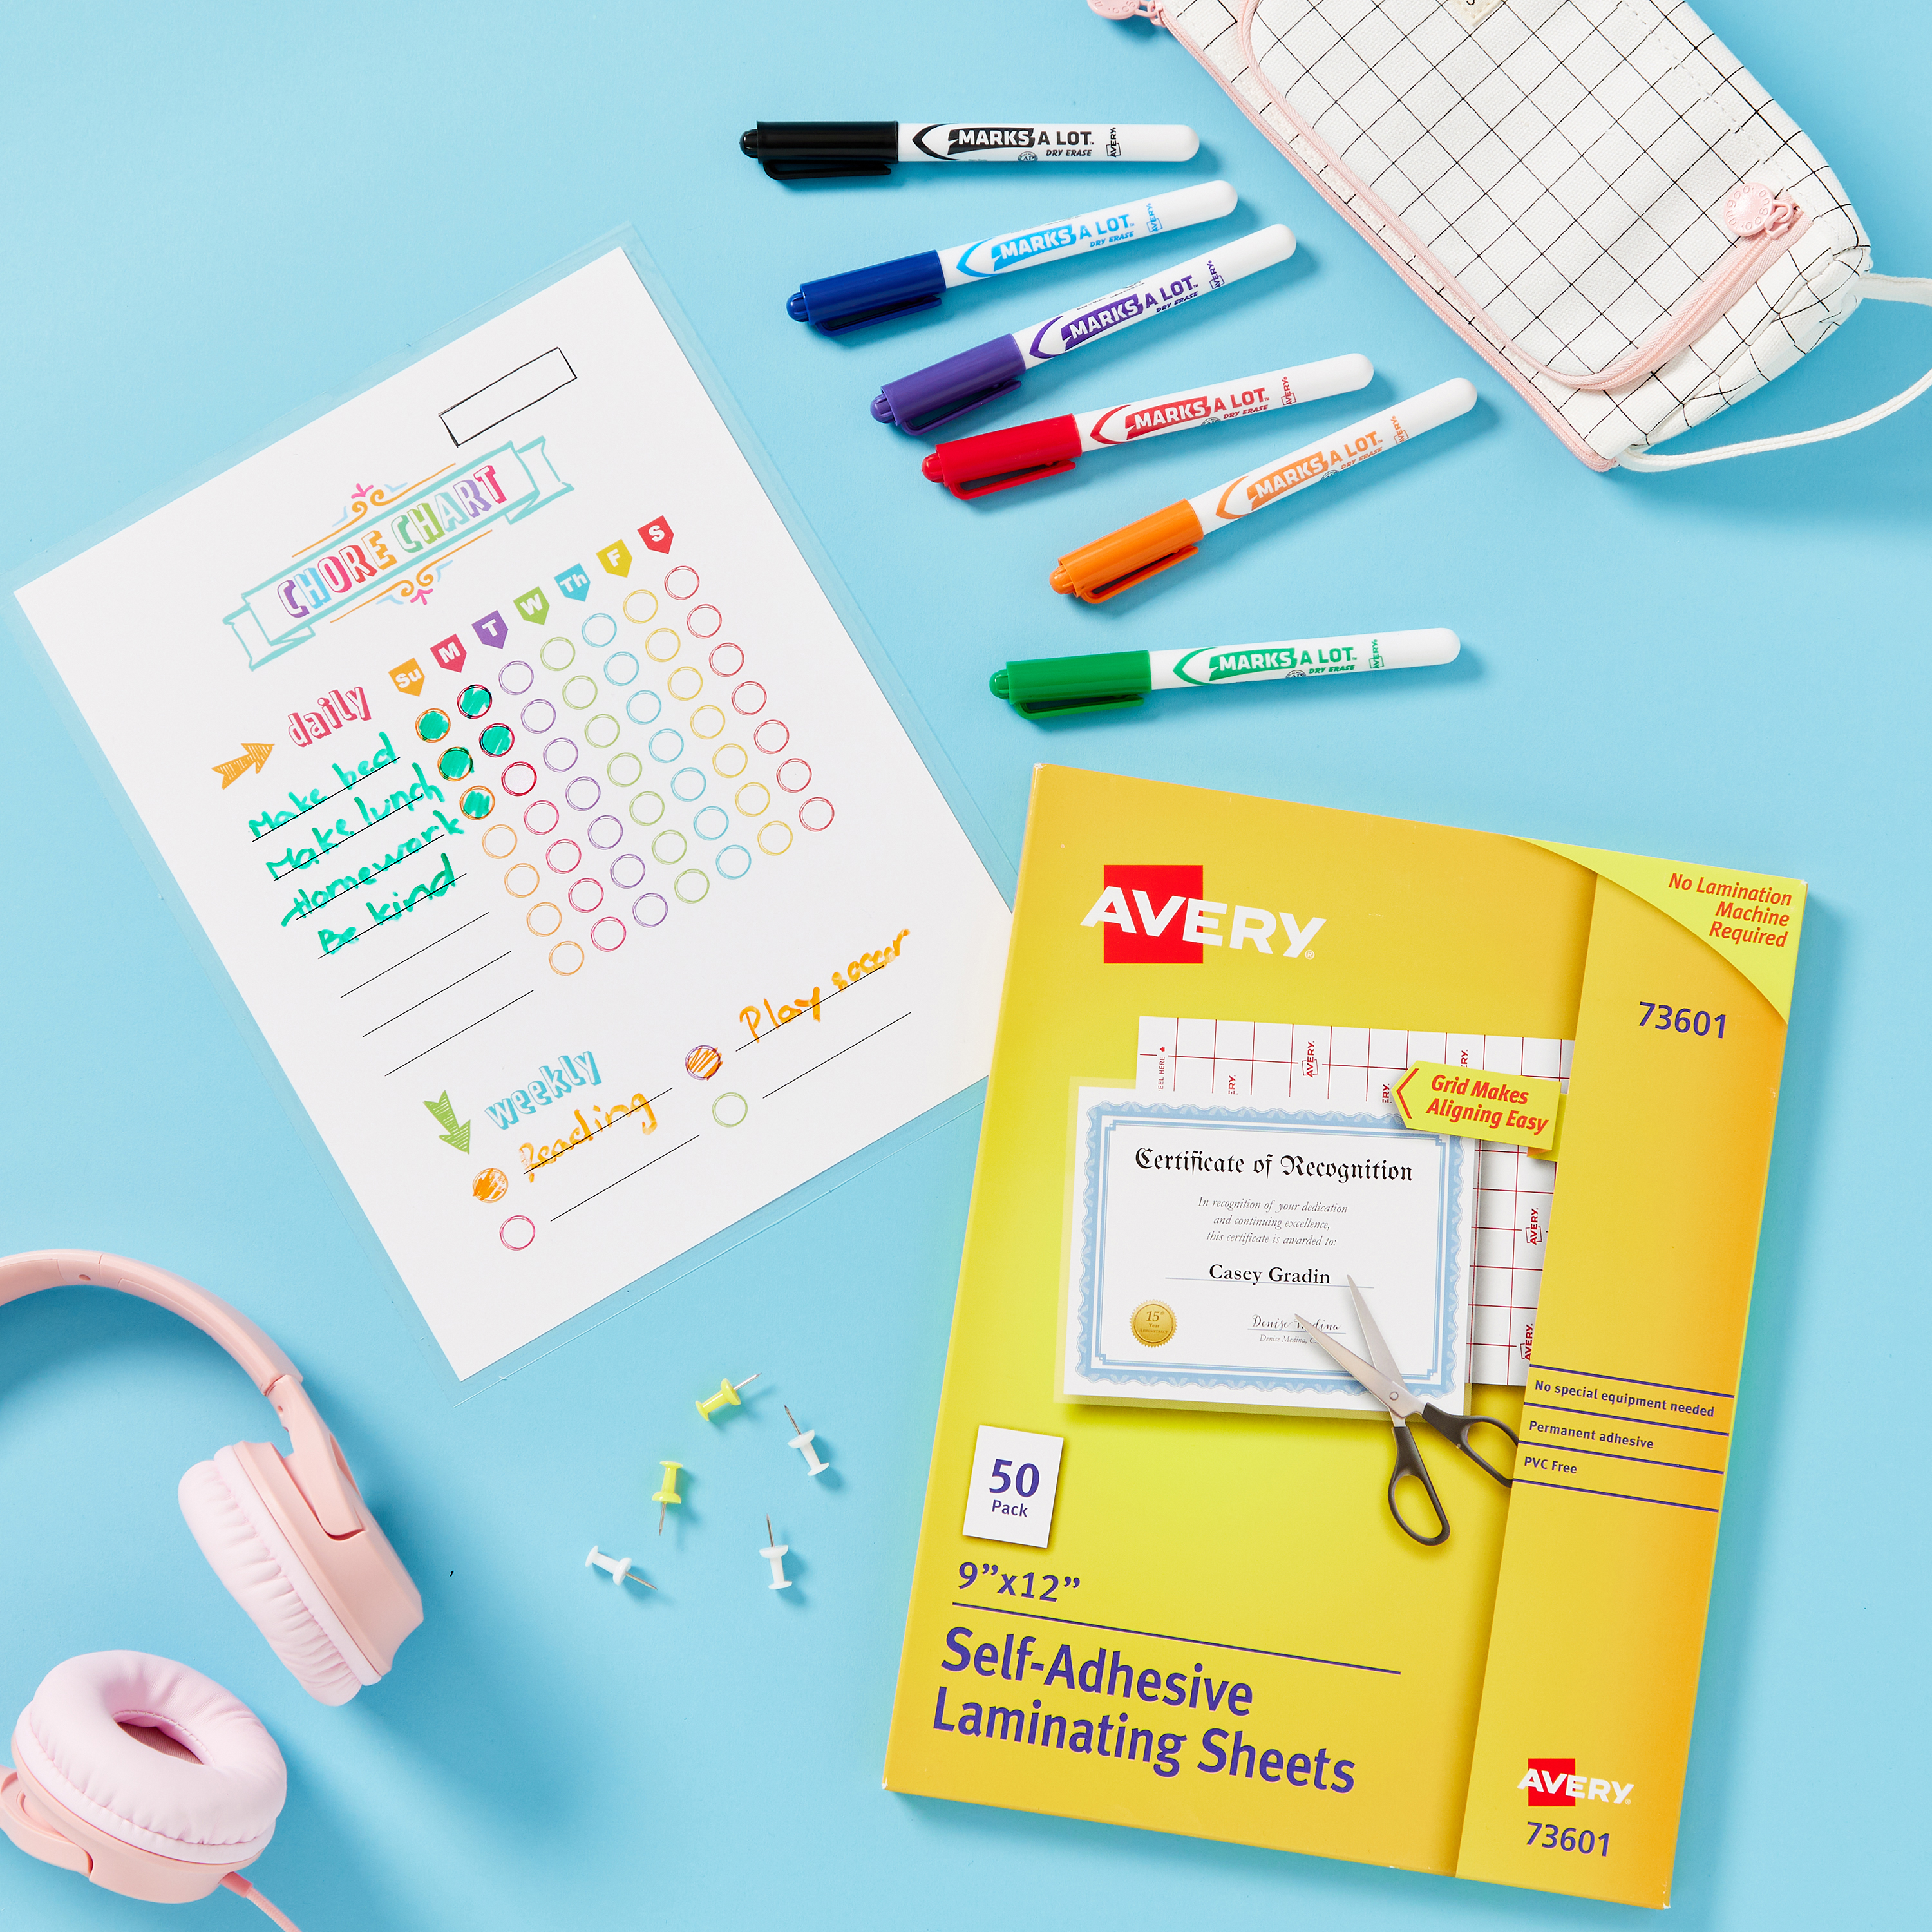 Avery 73601 laminating sheets and 24481 dry erase markers are shown used together to demonstrate making a DIY dry erase chore chart for tweens and teens. 